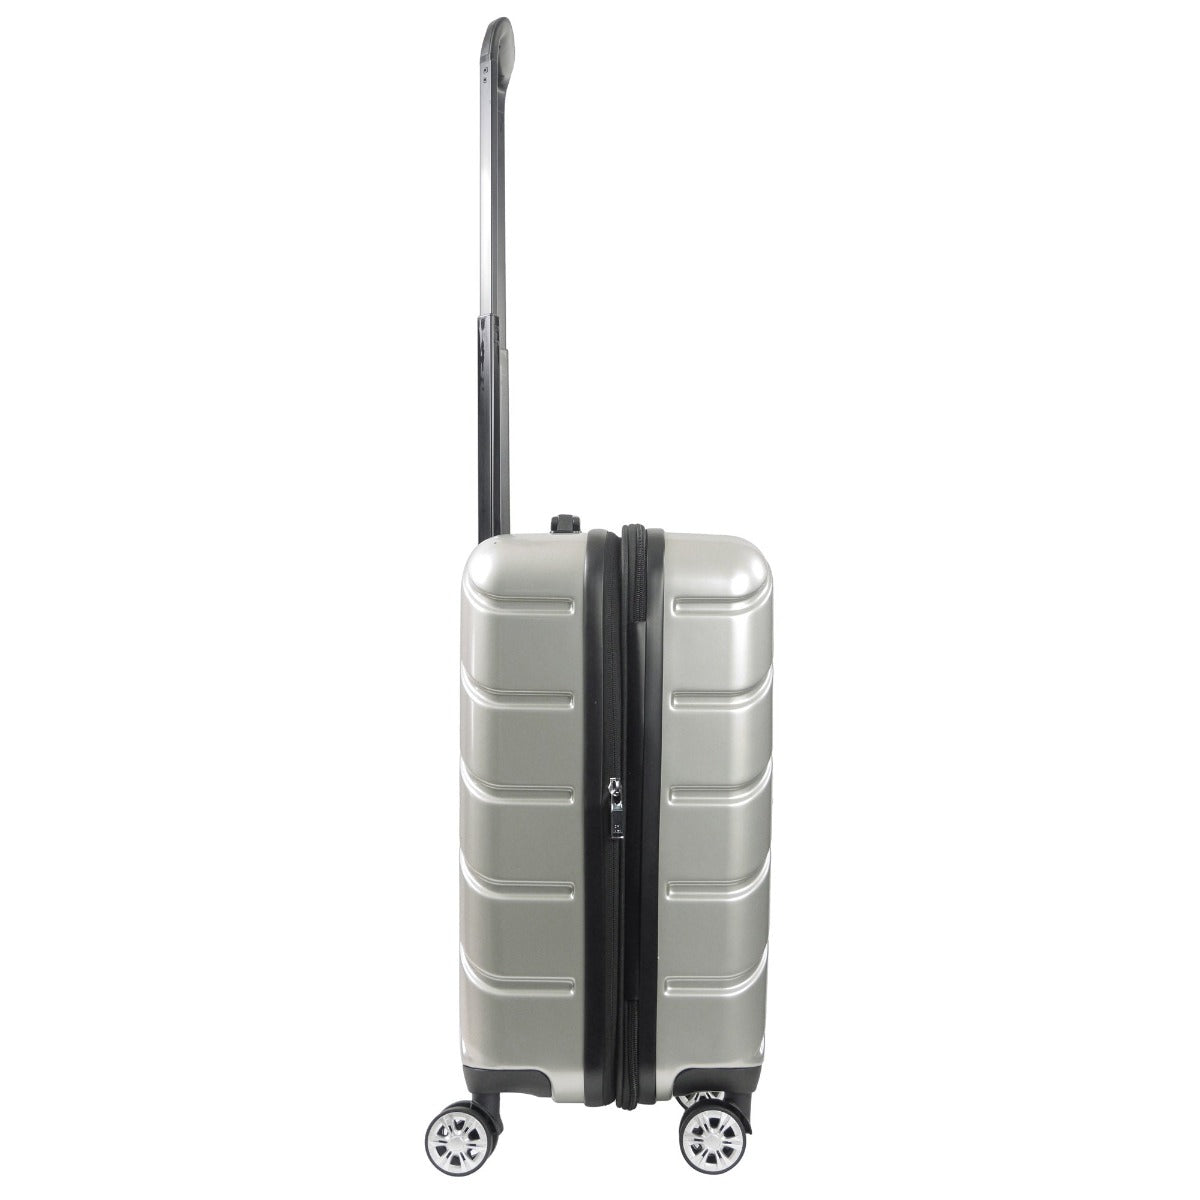 Ful Velocity 23" carry-on hardside spinner suitcase silver luggage